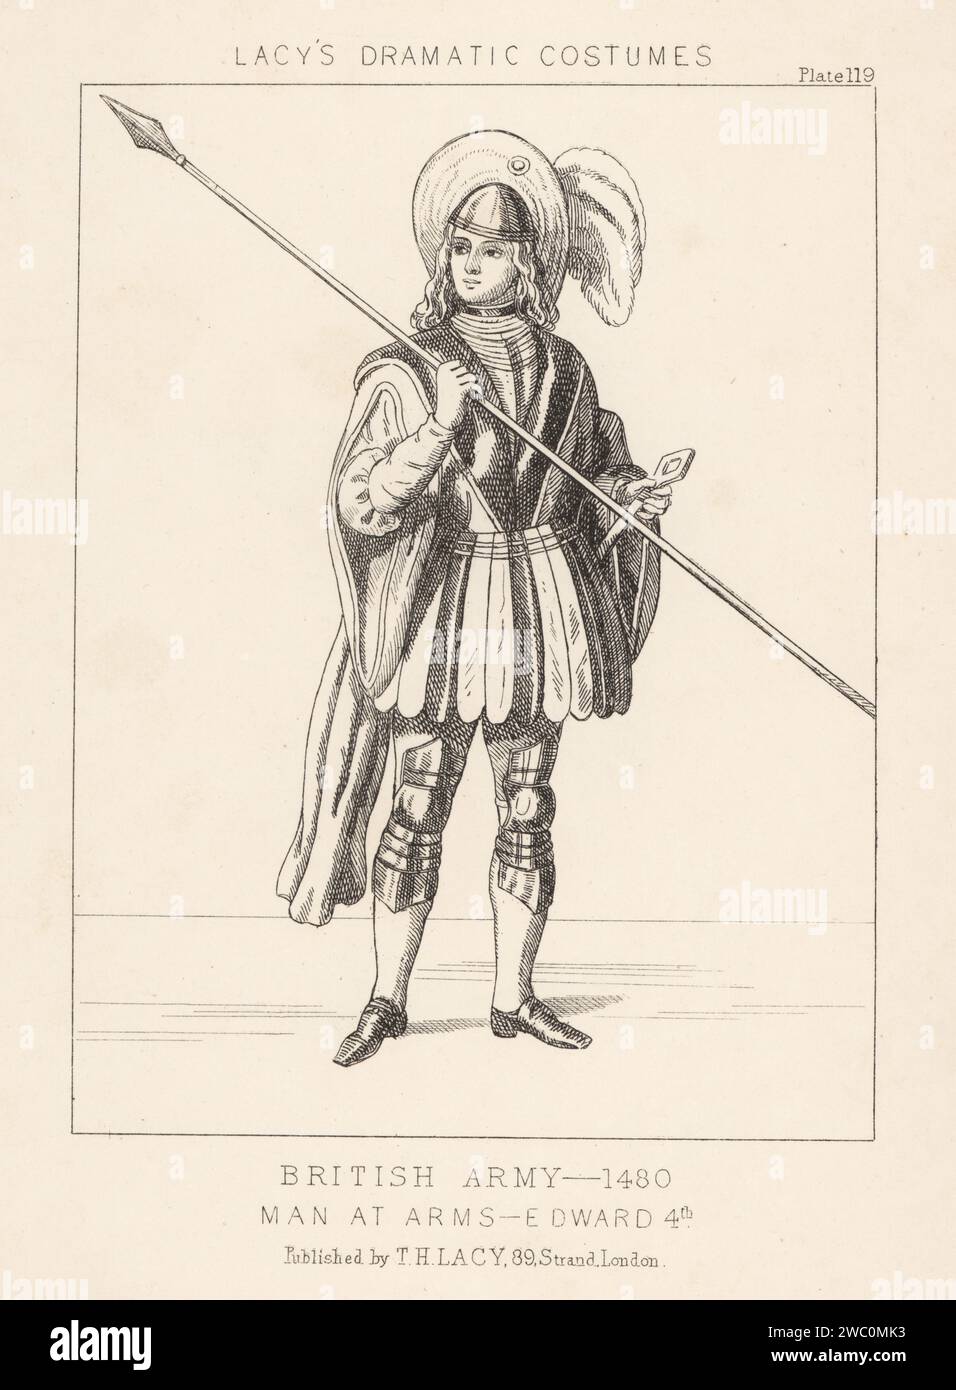 English man at Arms, reign of King Edward IV, 15th century. Knight in plumed helmet, lined doublet with hanging sleeves, poleyn knee armour over hose, shoes, holding a lance and key. Lithograph from Thomas Hailes Lacy's Male Costumes, Historical, National and Dramatic in 200 Plates, London, 1865. Lacy (1809-1873) was a British actor, playwright, theatrical manager and publisher. Stock Photo